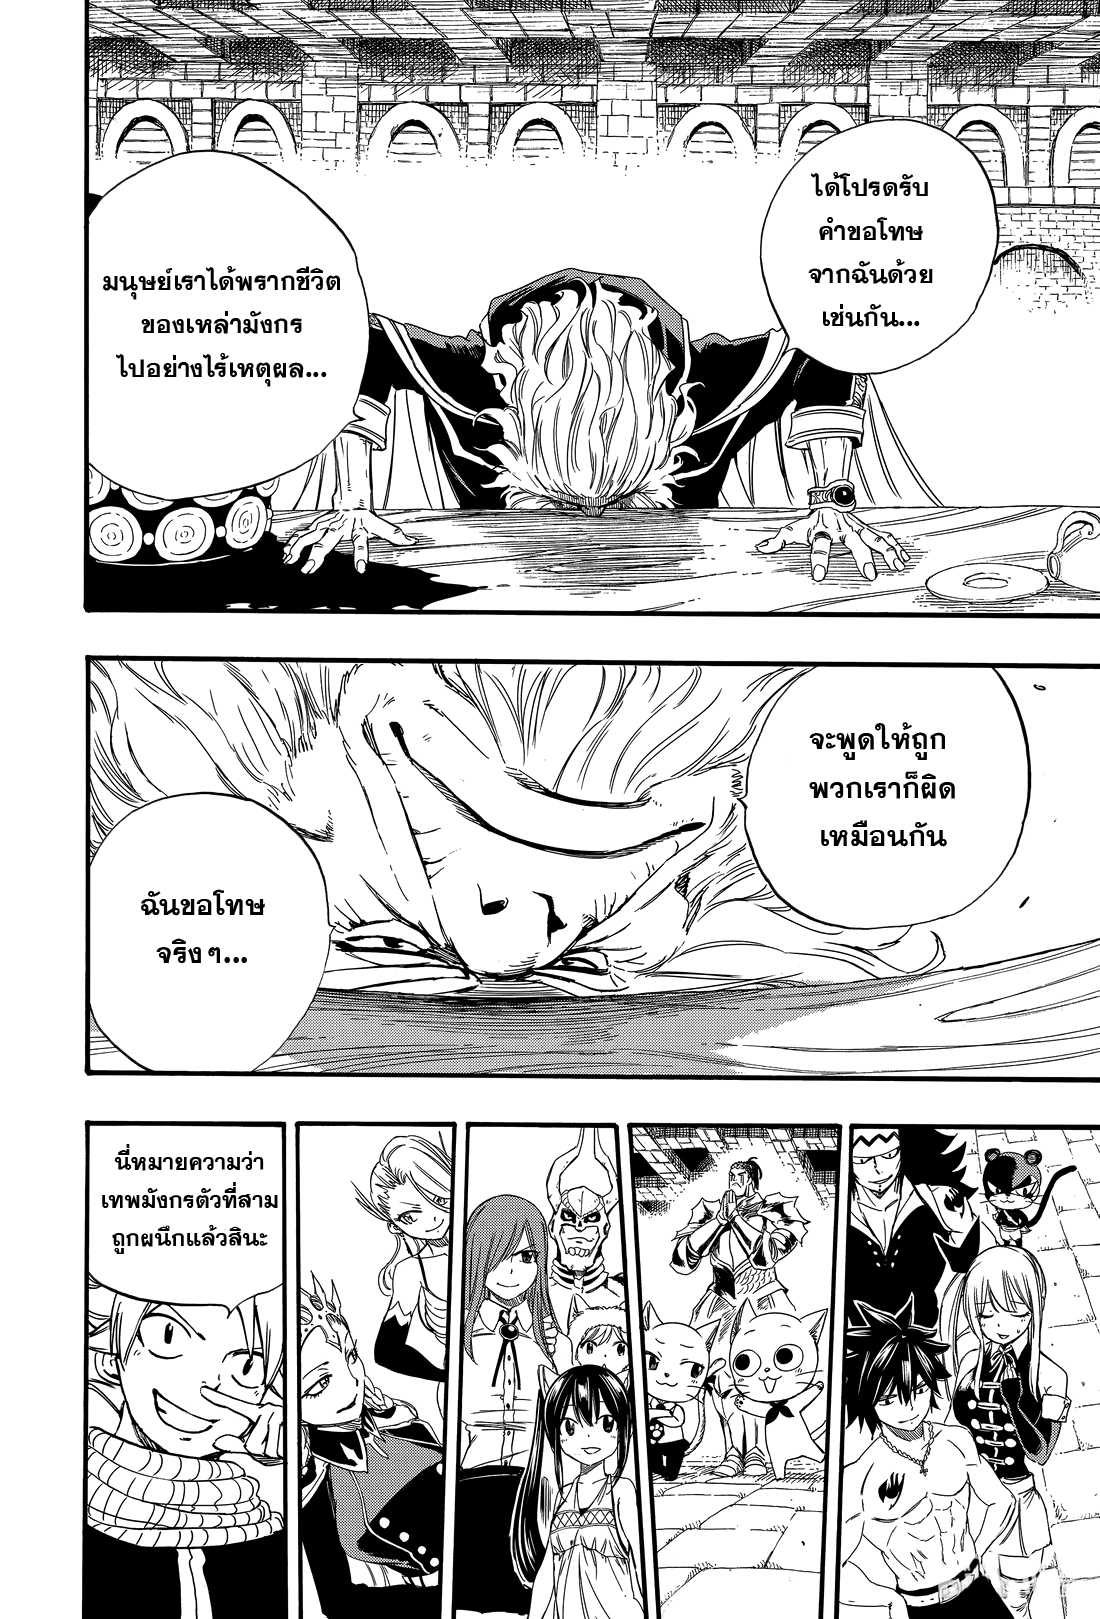 Fairy Tail 100 Years Quest 122 (16)